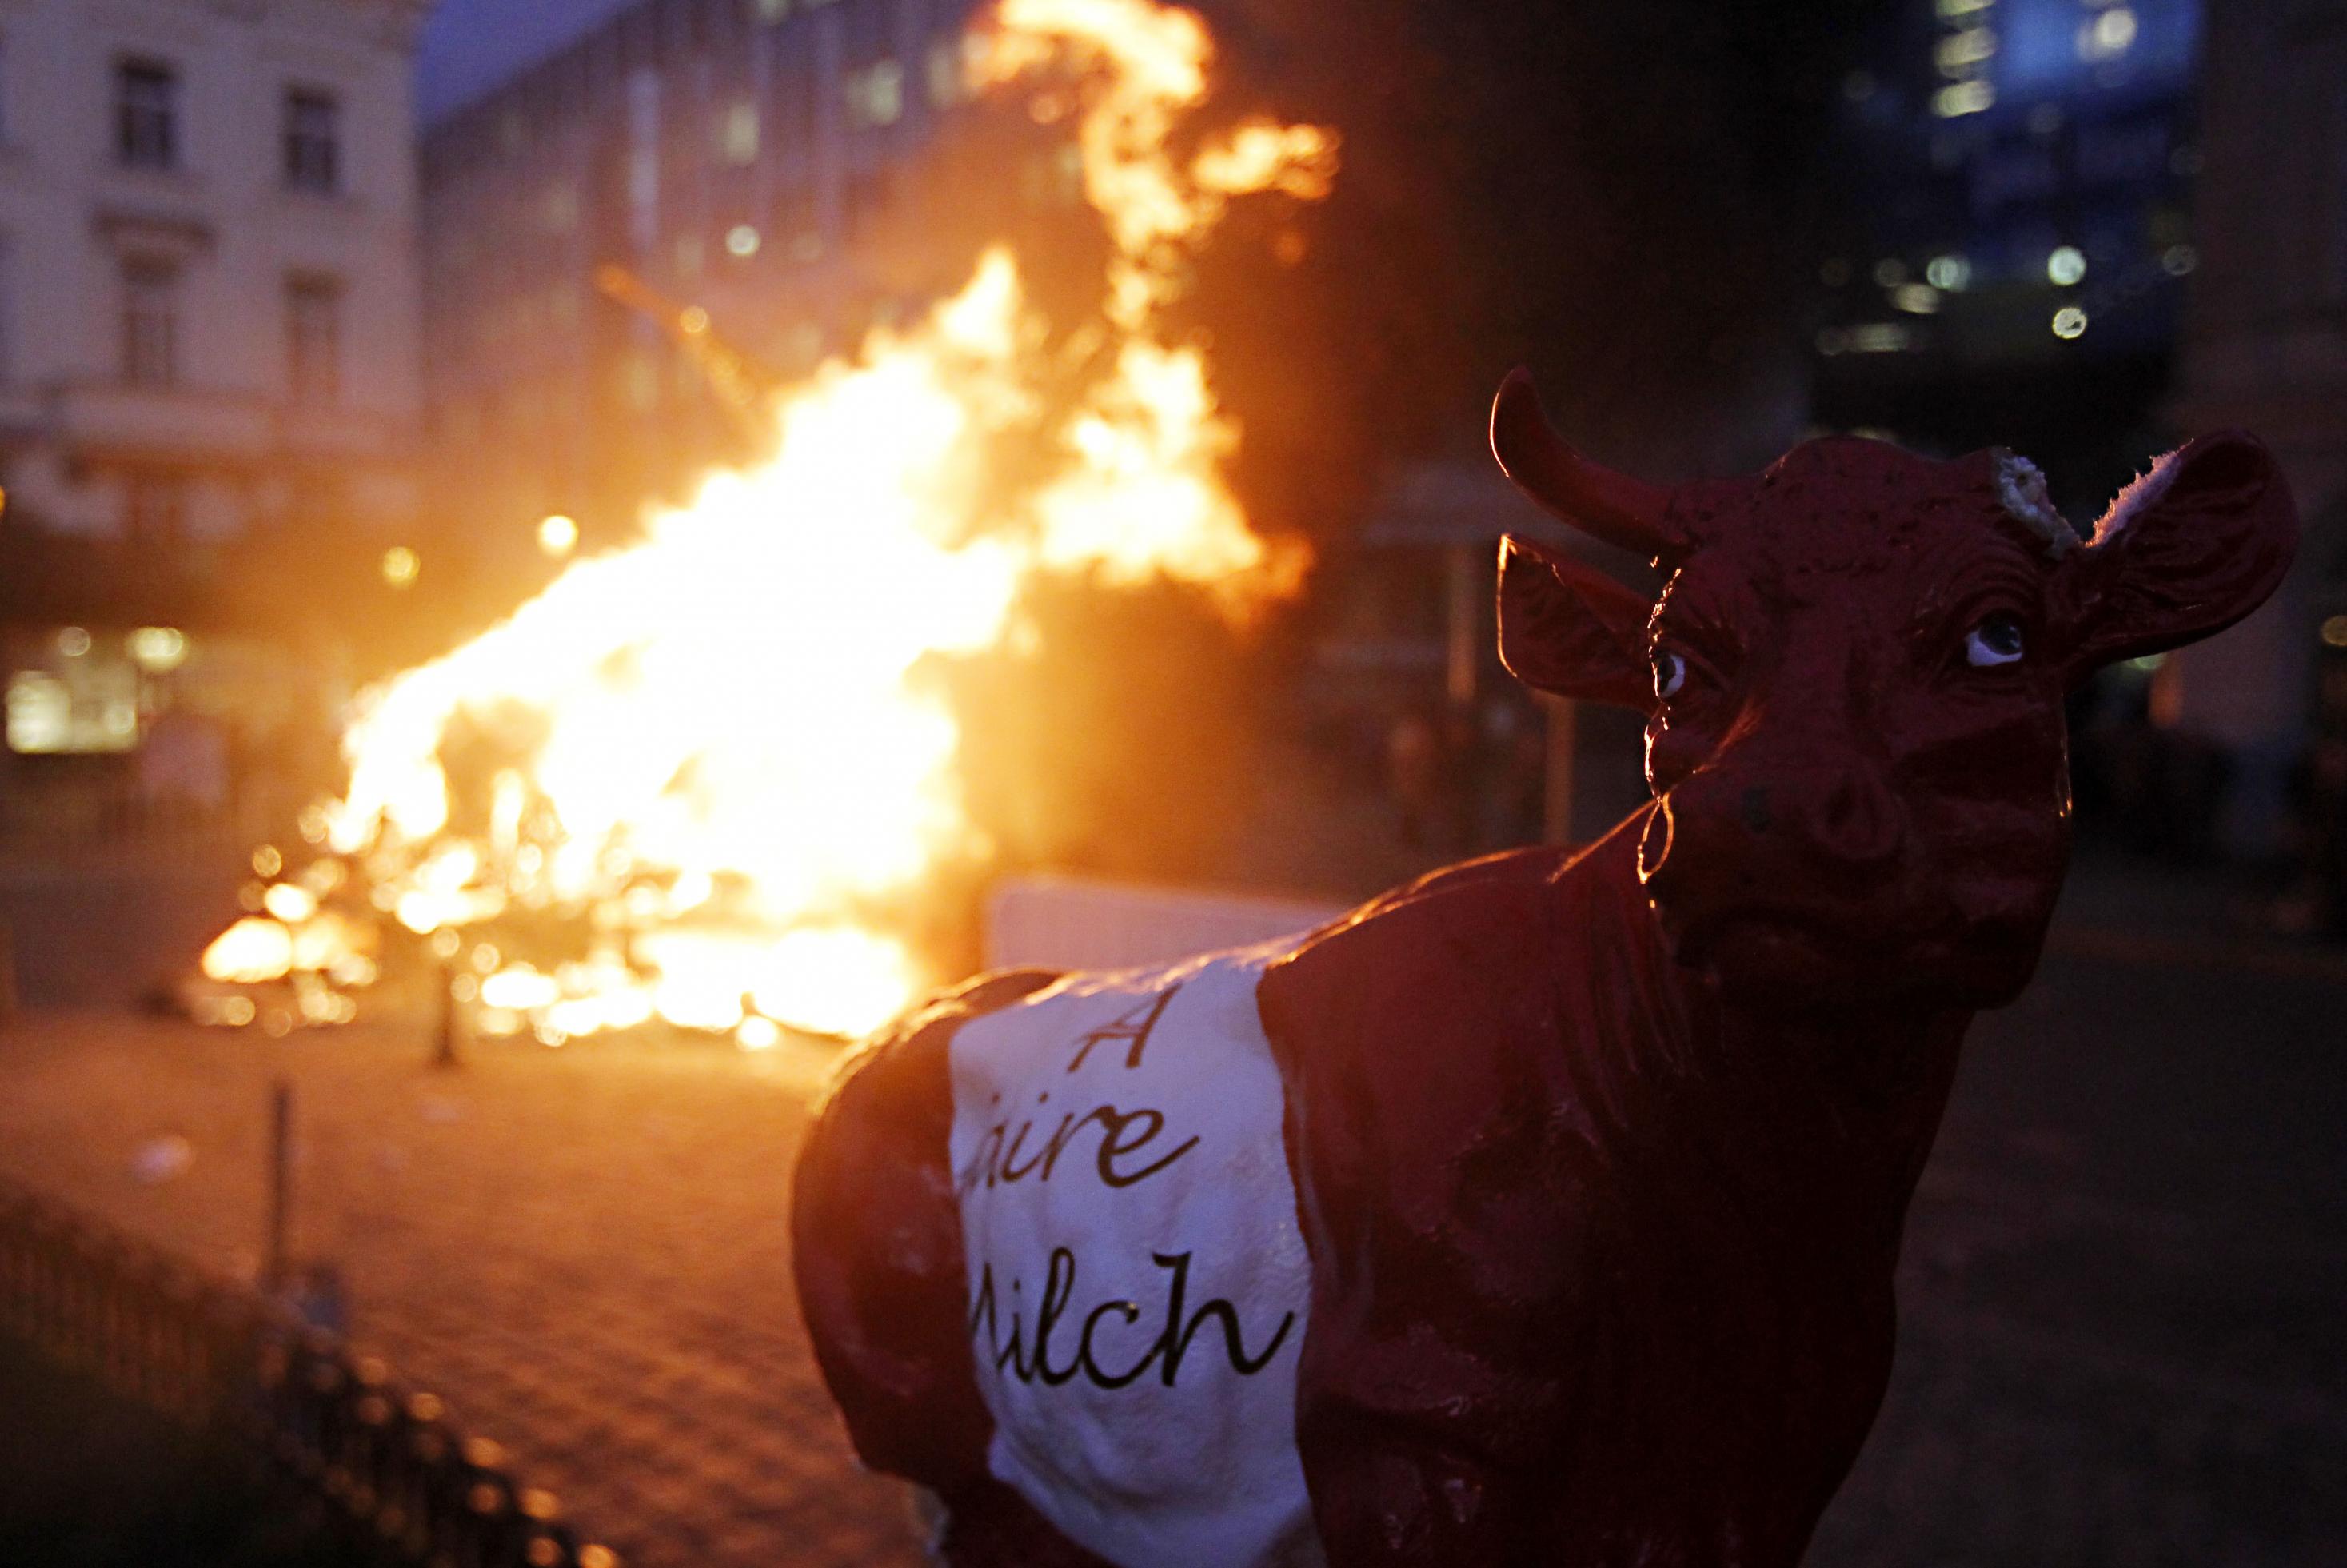 (121126)—BRUSSELS, Nov. 26, 2012 ()—A fake cow is seen beside the fire set up by dairy farmers during a protest against EU agricultural policies at the Place du Luxembourg, outside the European Parliament in Brussels, capital of Belgium, on Nov. 26, 2012. Dairy farmers from all over Europe demonstrated today with about 1,000 tractors at the European Parliament in Brussels to protest against falling milk prices caused by overproduction in the continent. (/Zhou Lei)